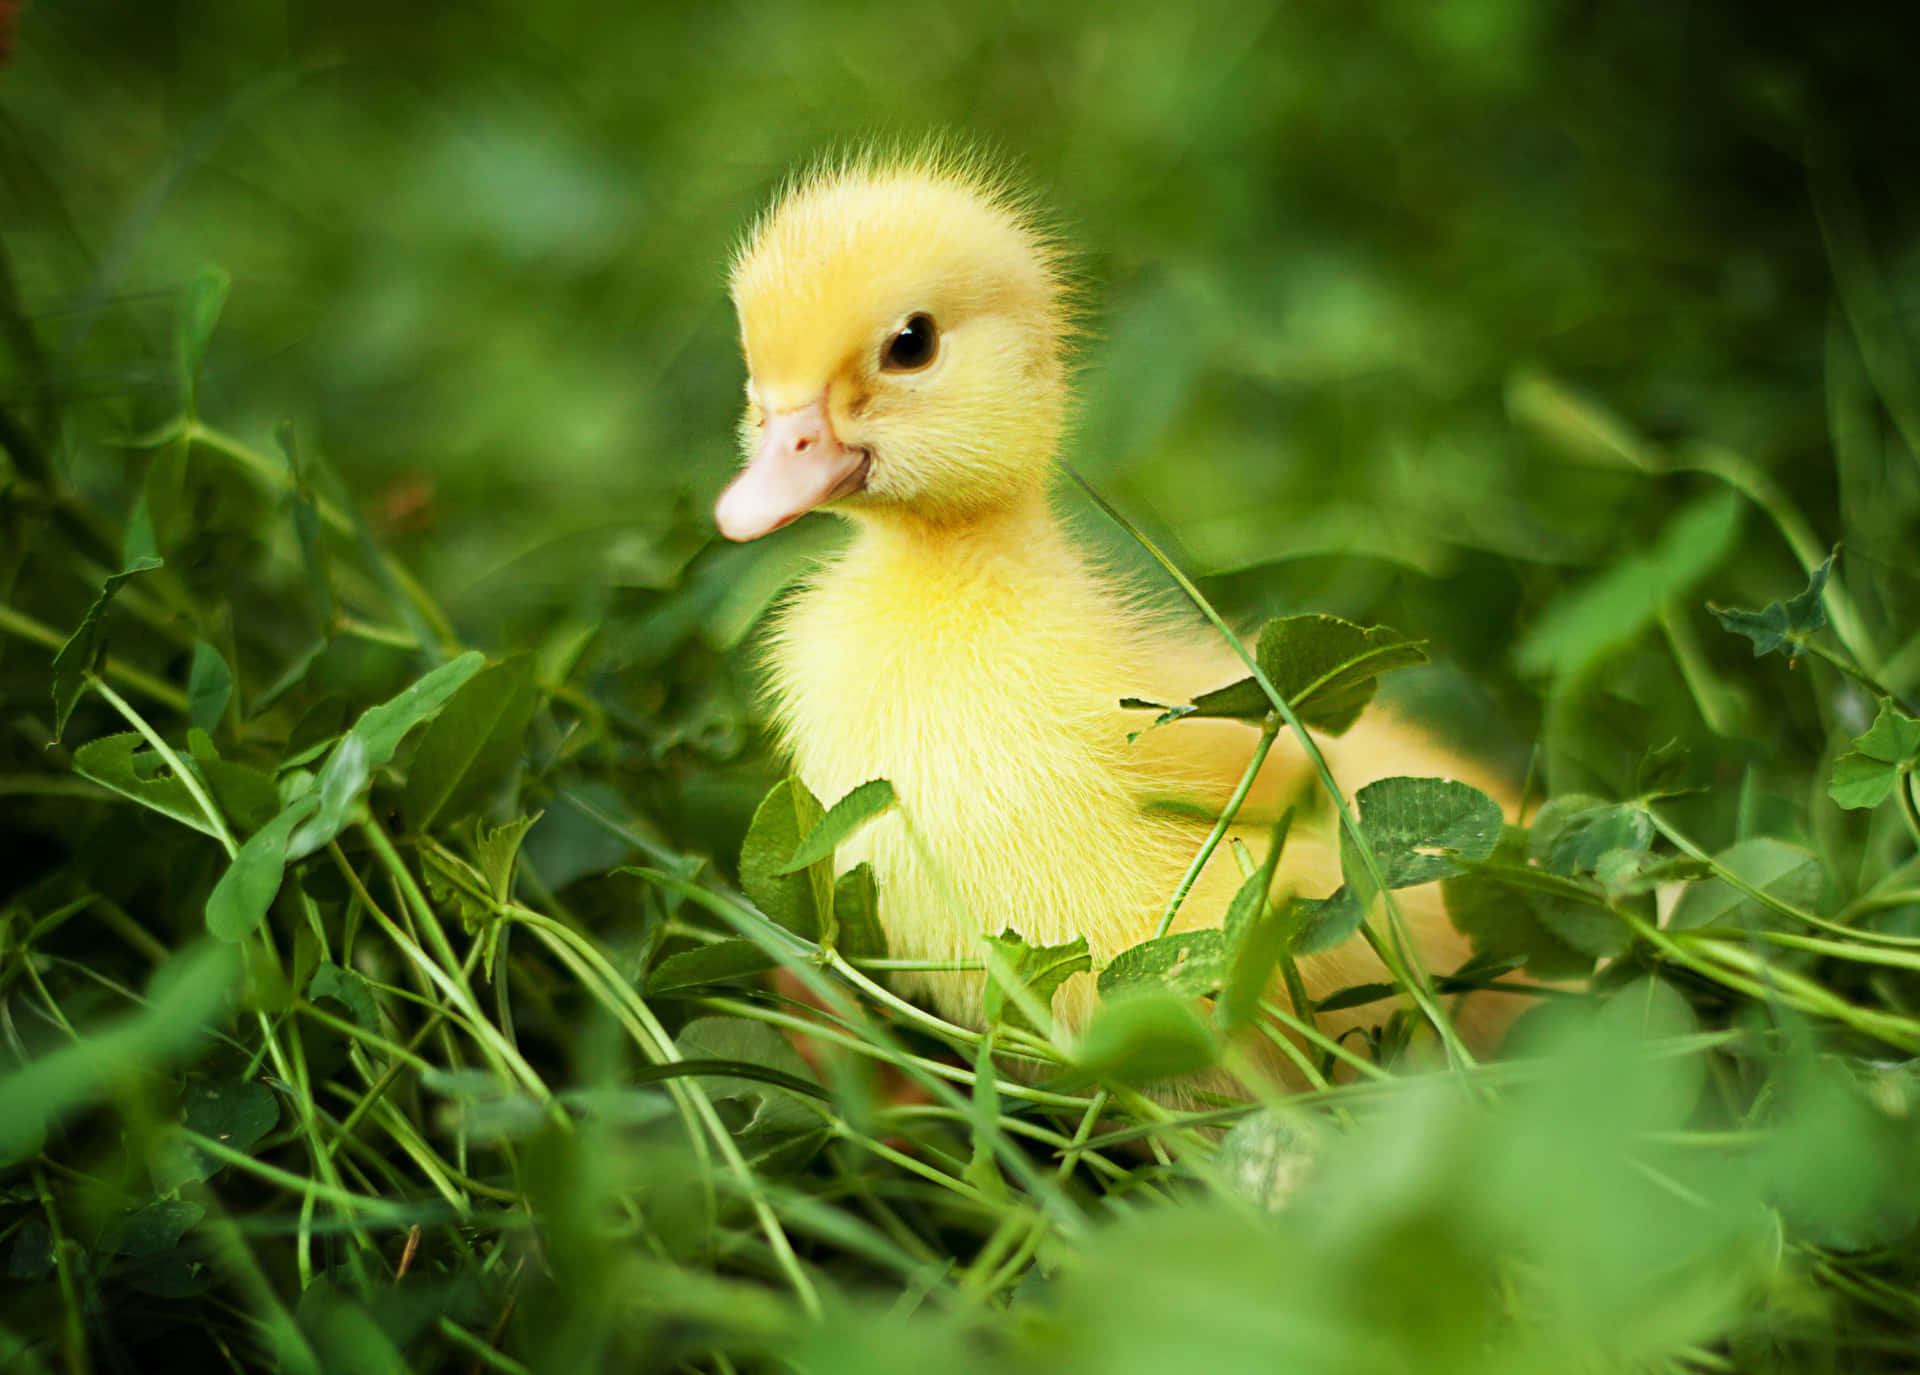 Adorable Duckling Splashing in a Pond